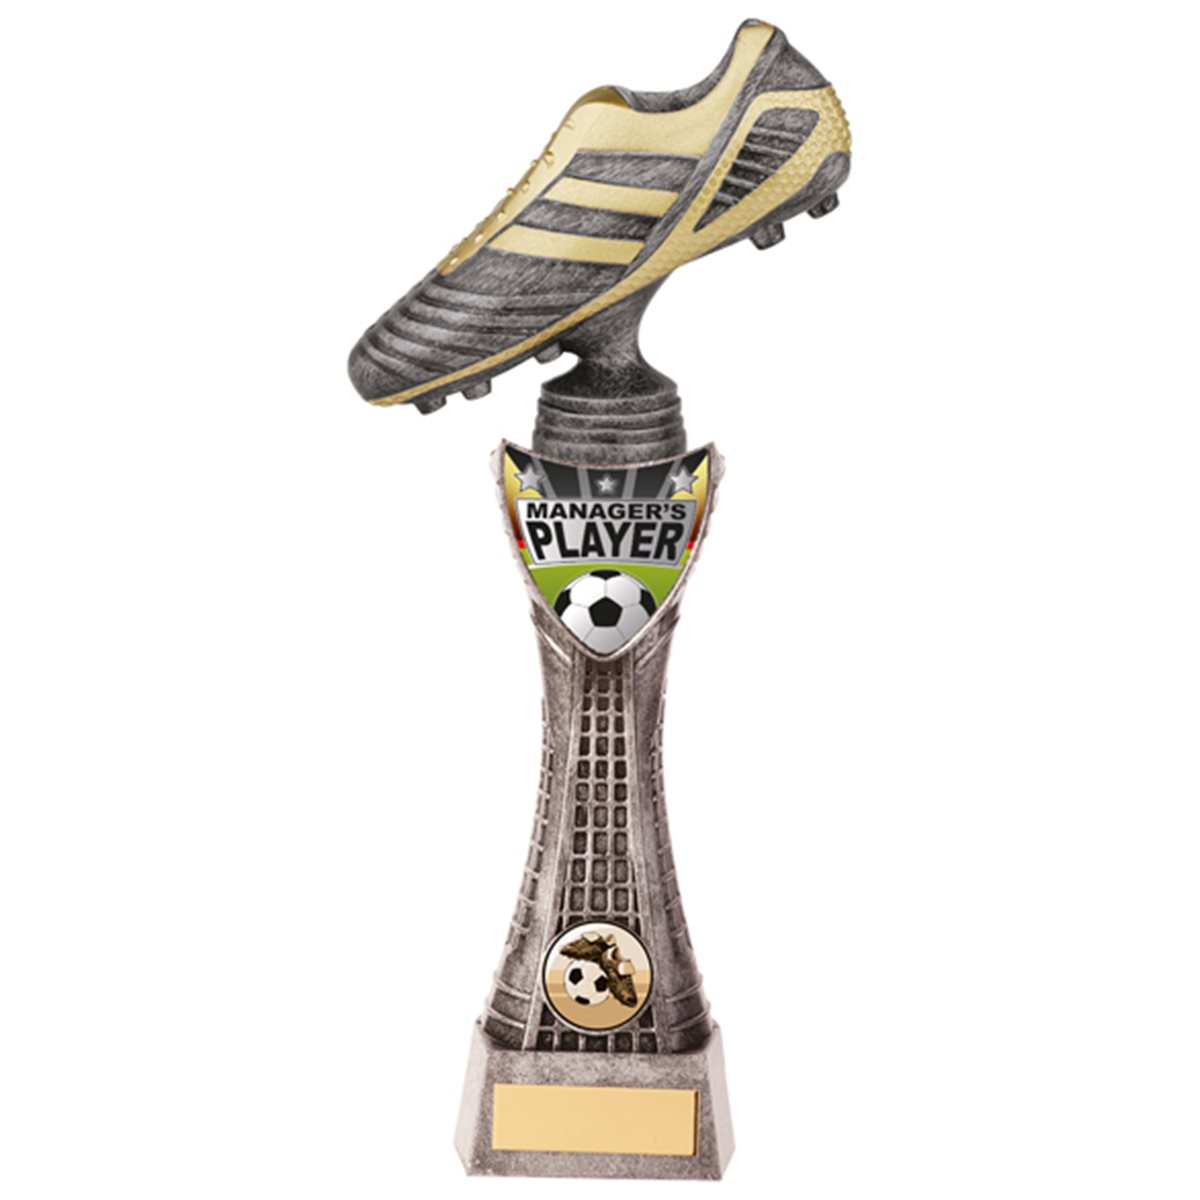 Valiant Manager's Player Football Trophy PQ20643